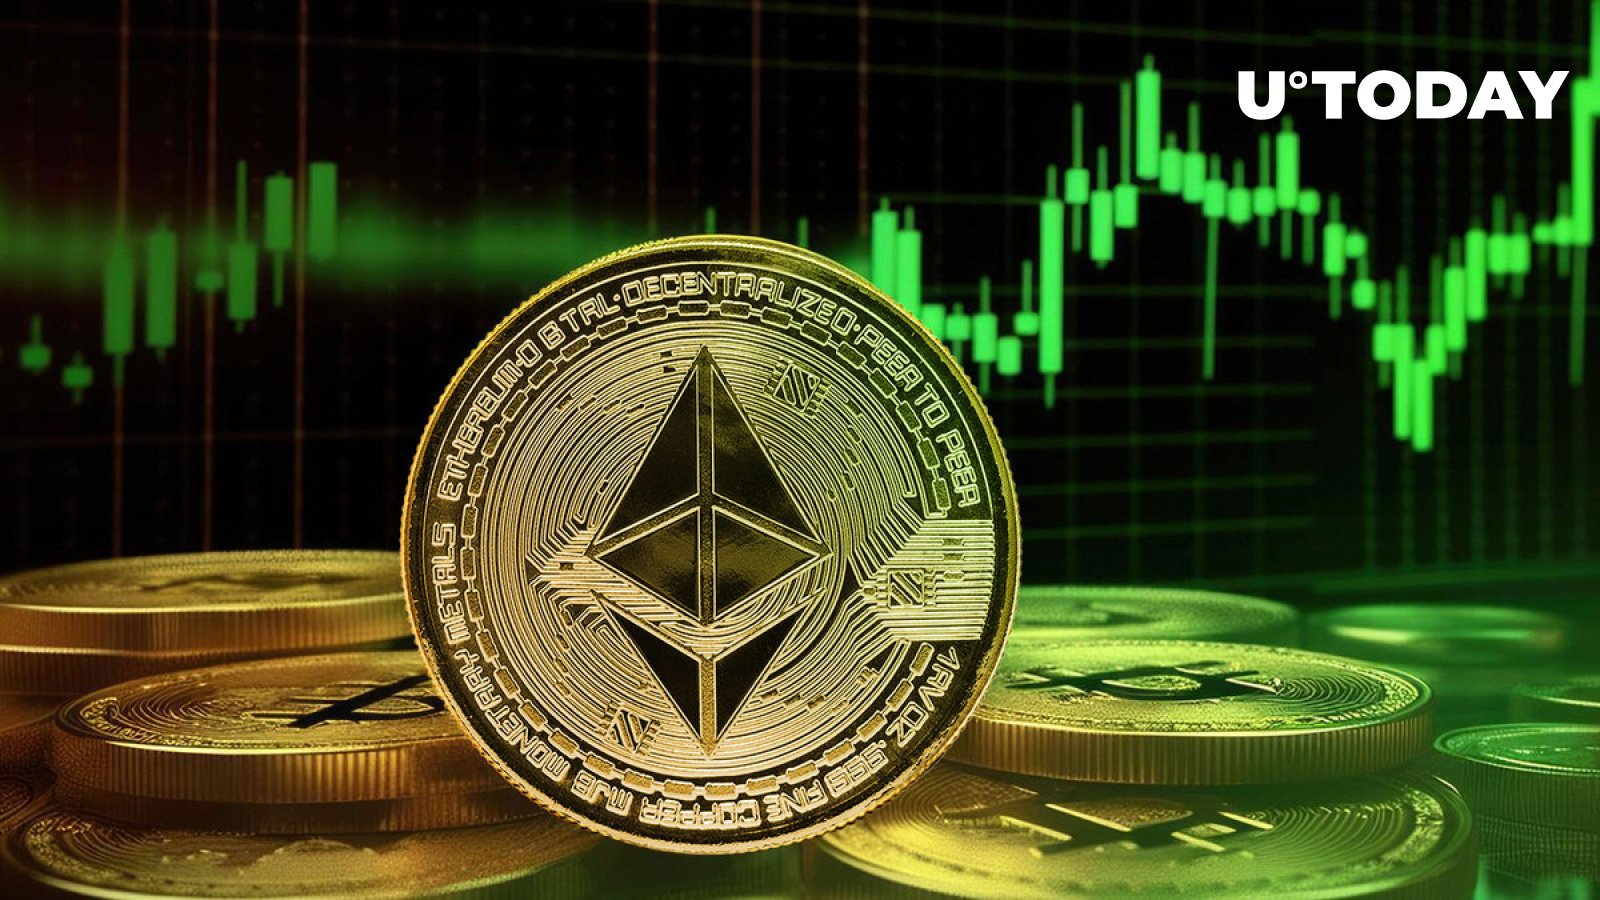 Can Ethereum (ETH) Reach $4,000 This Cycle?